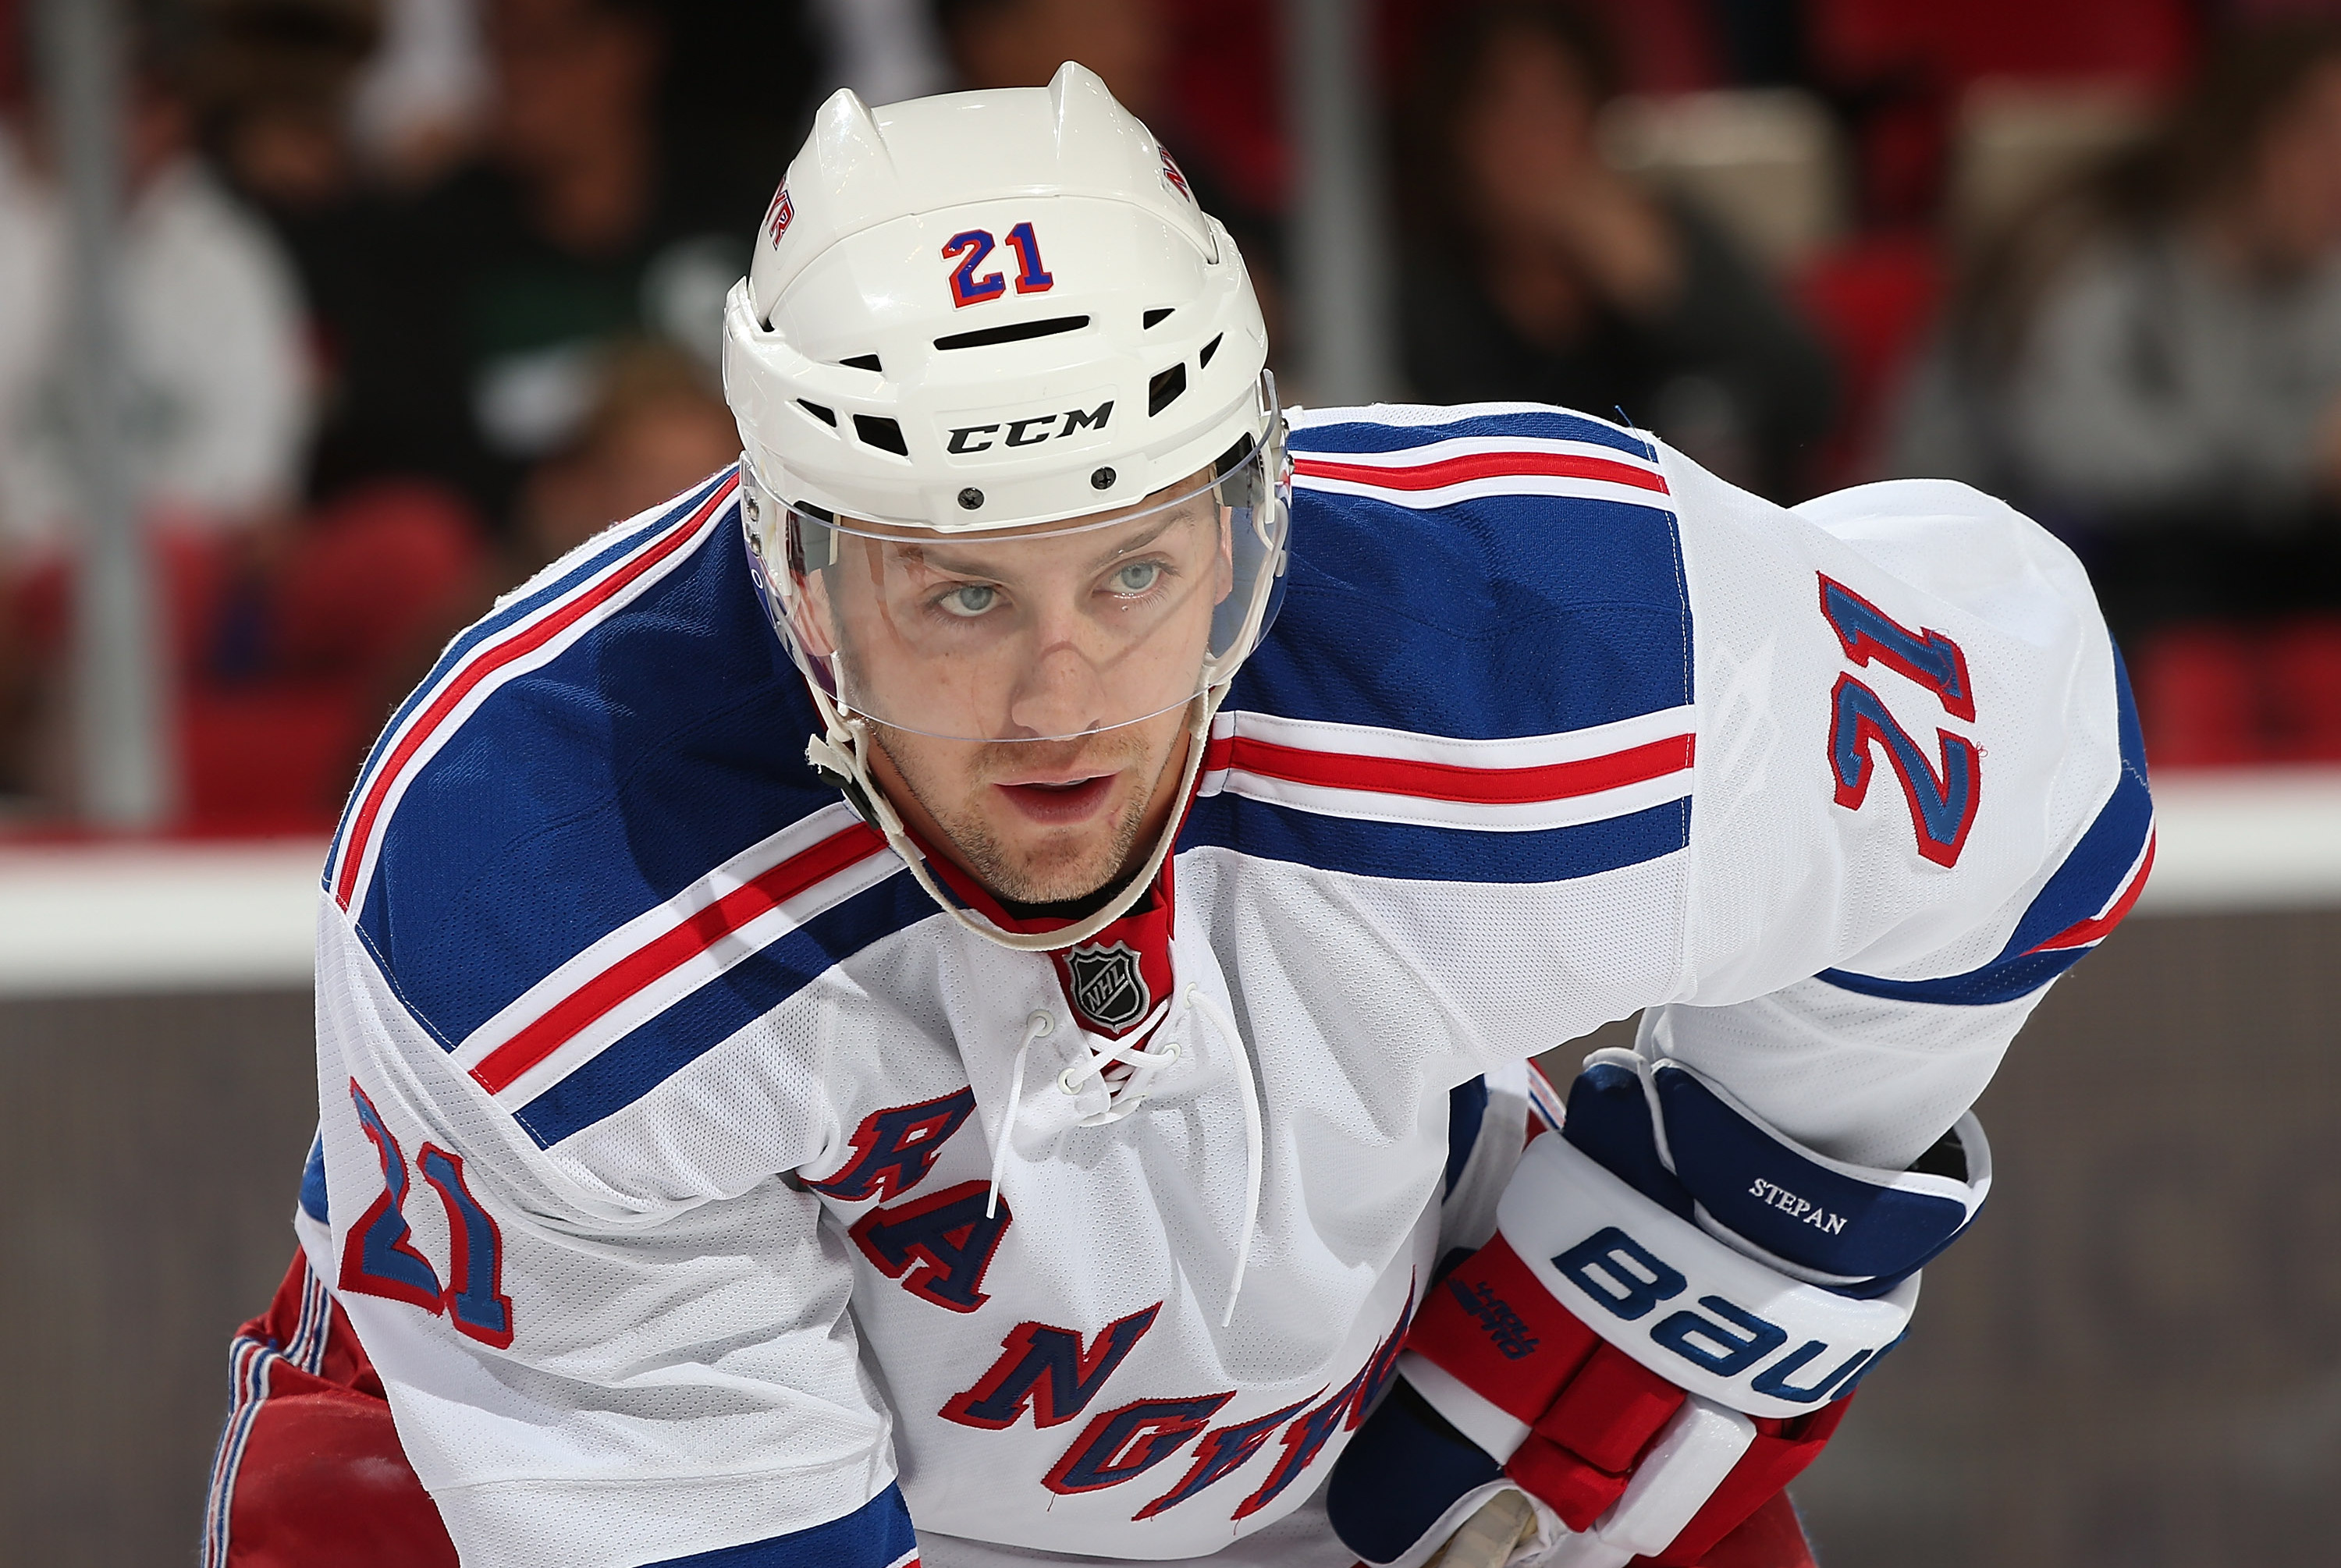 Derek Stepan retires from the NHL after 13 seasons - Daily Faceoff